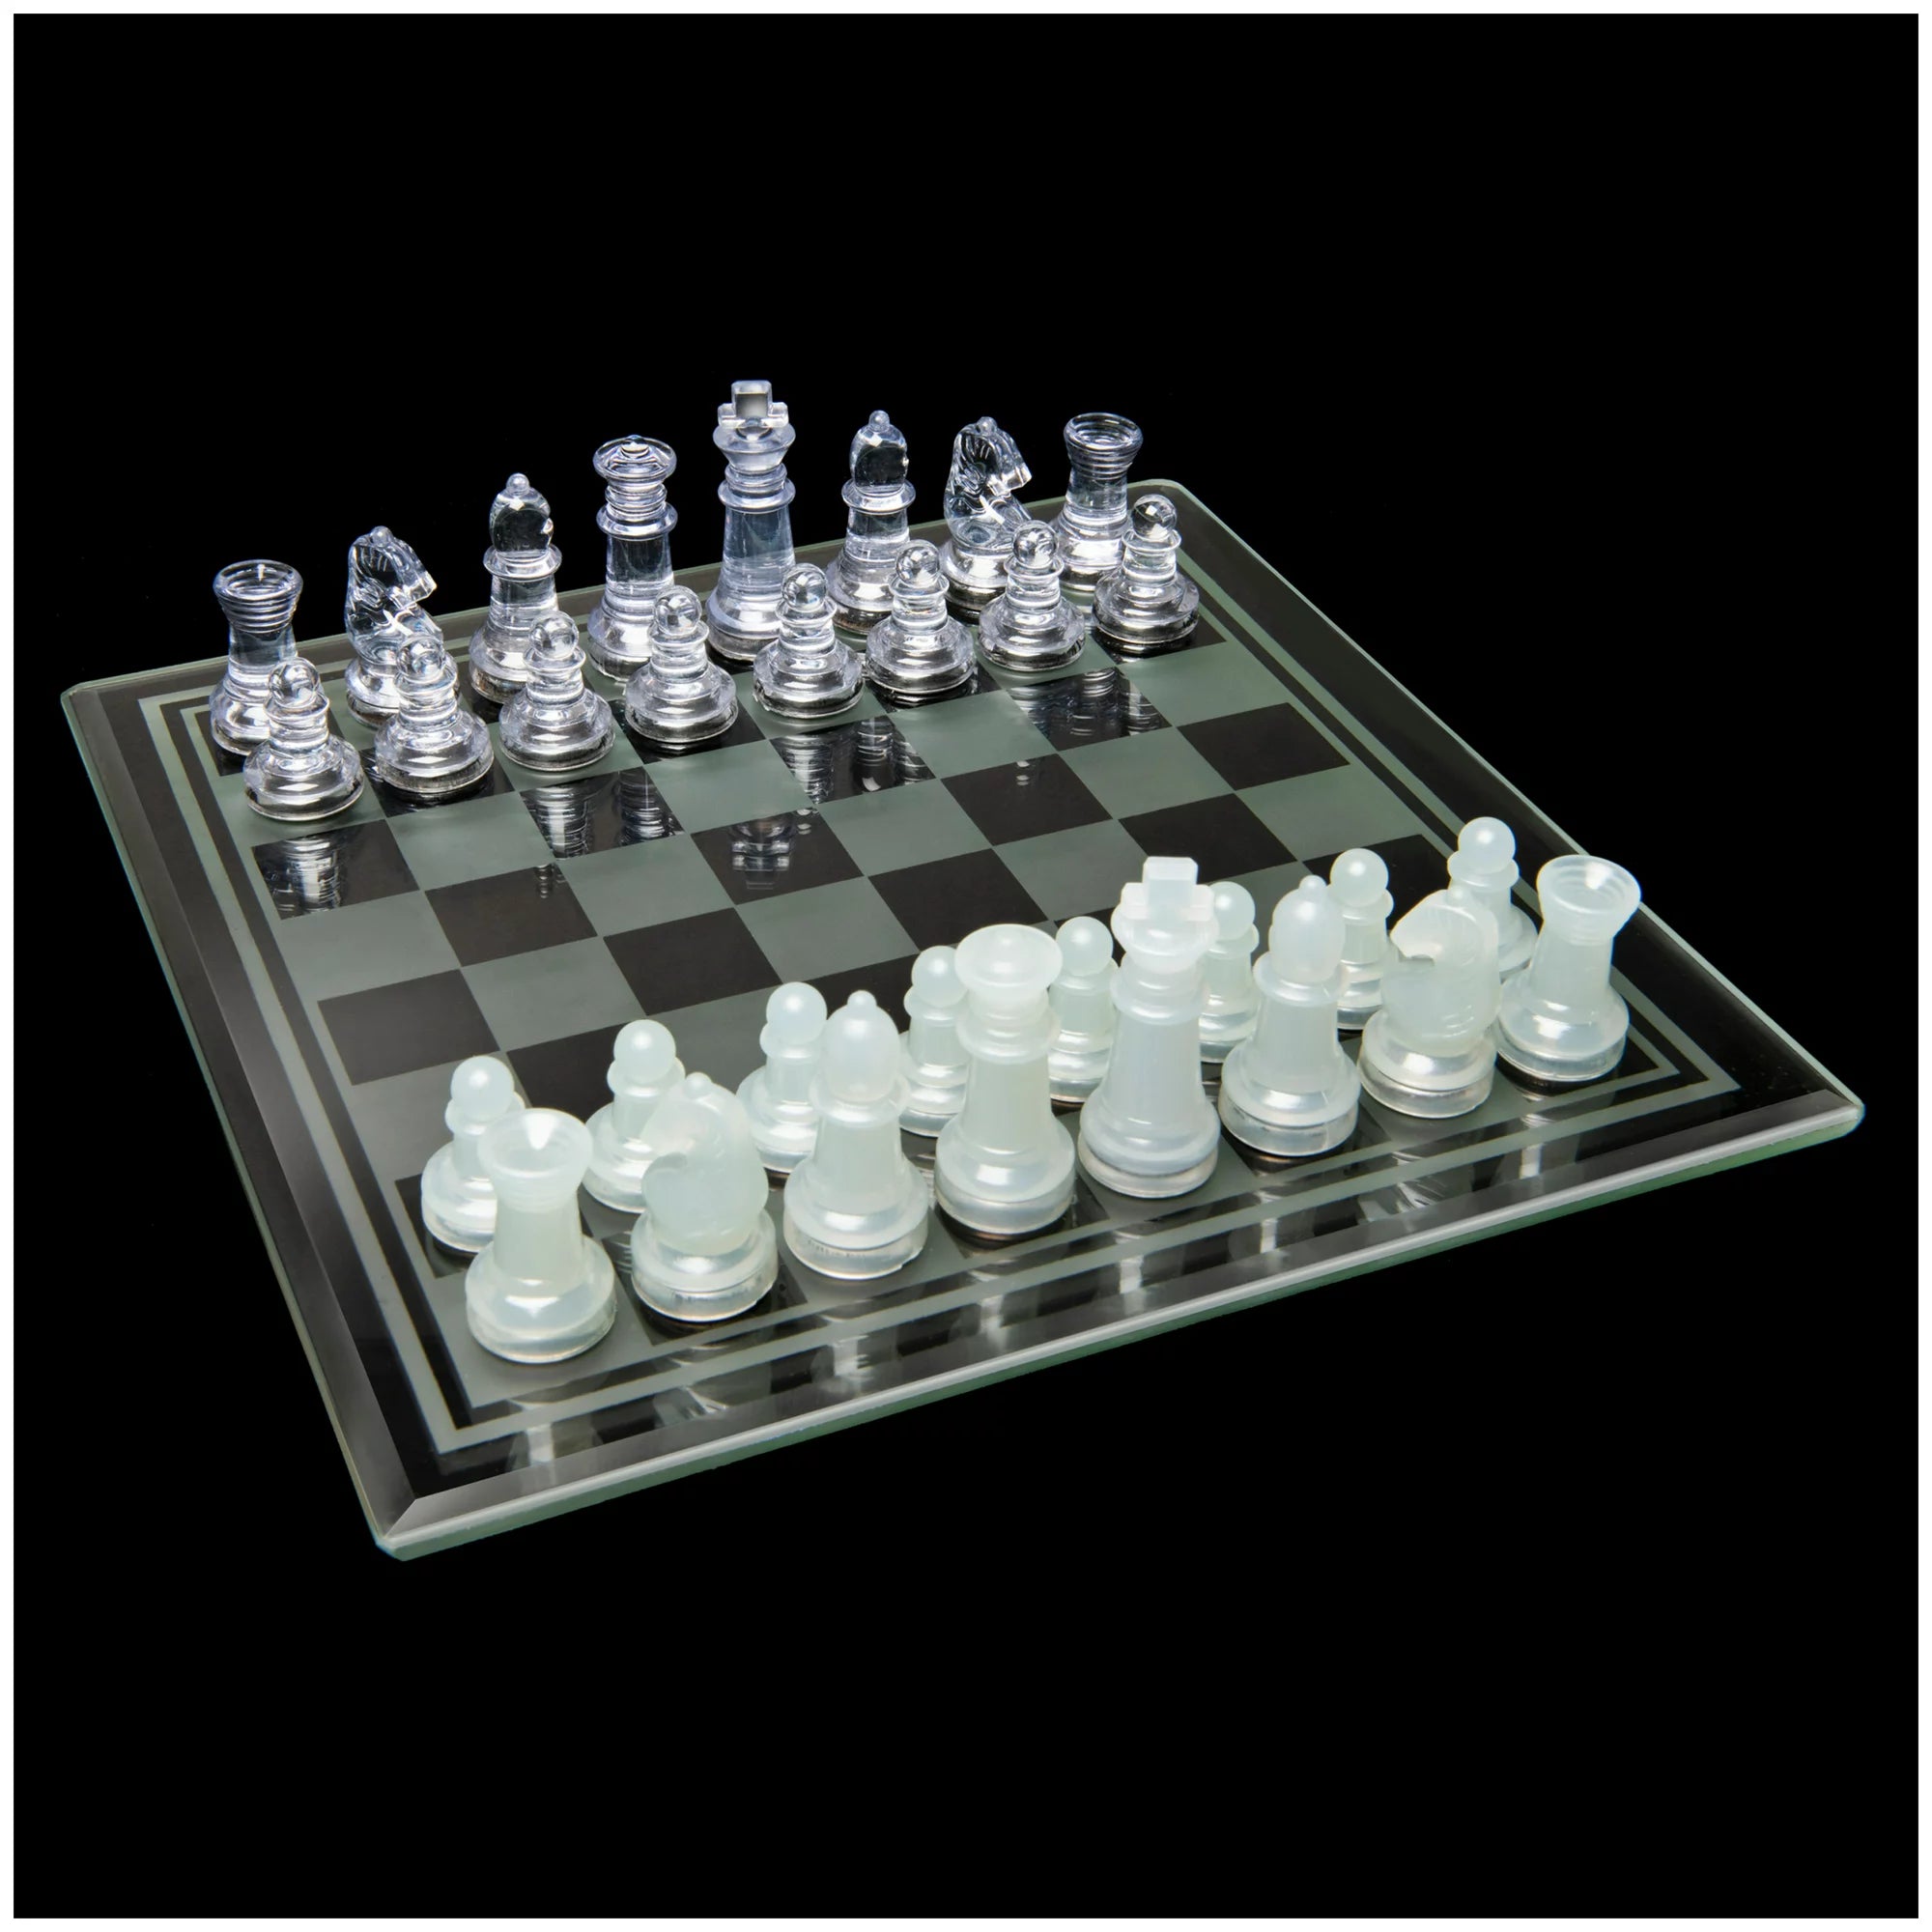 Glass Chess Board With Pieces